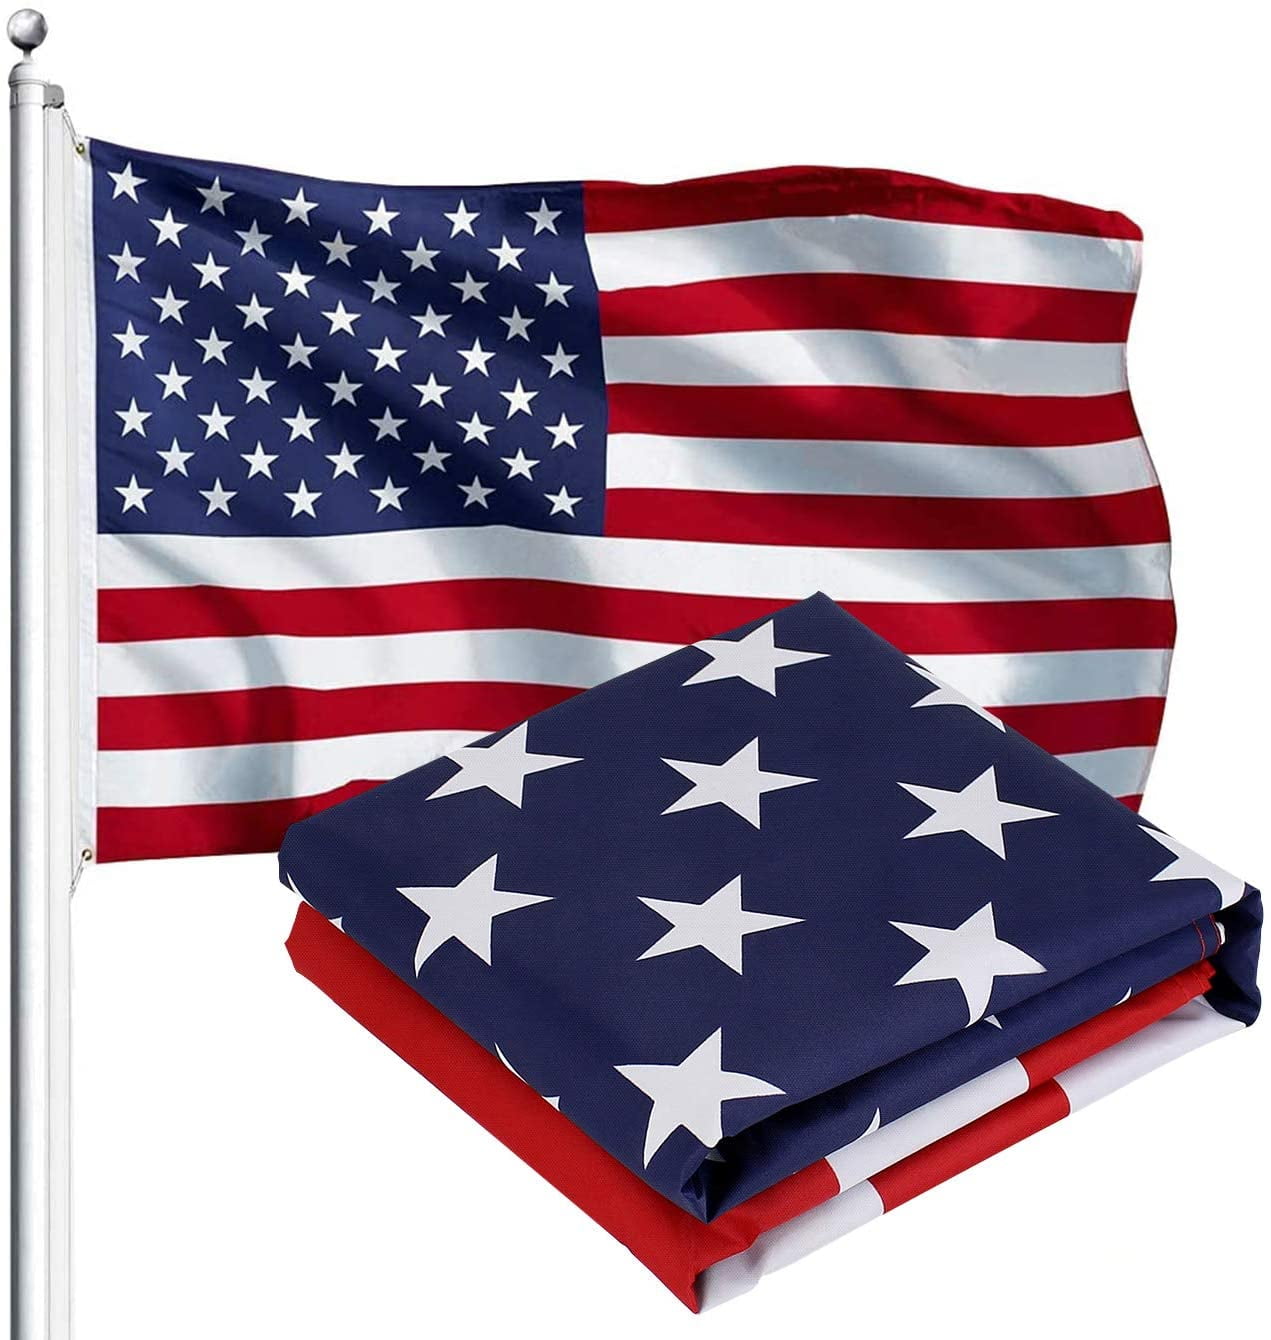 What Does a Black and White American Flag Mean? – BestFlag